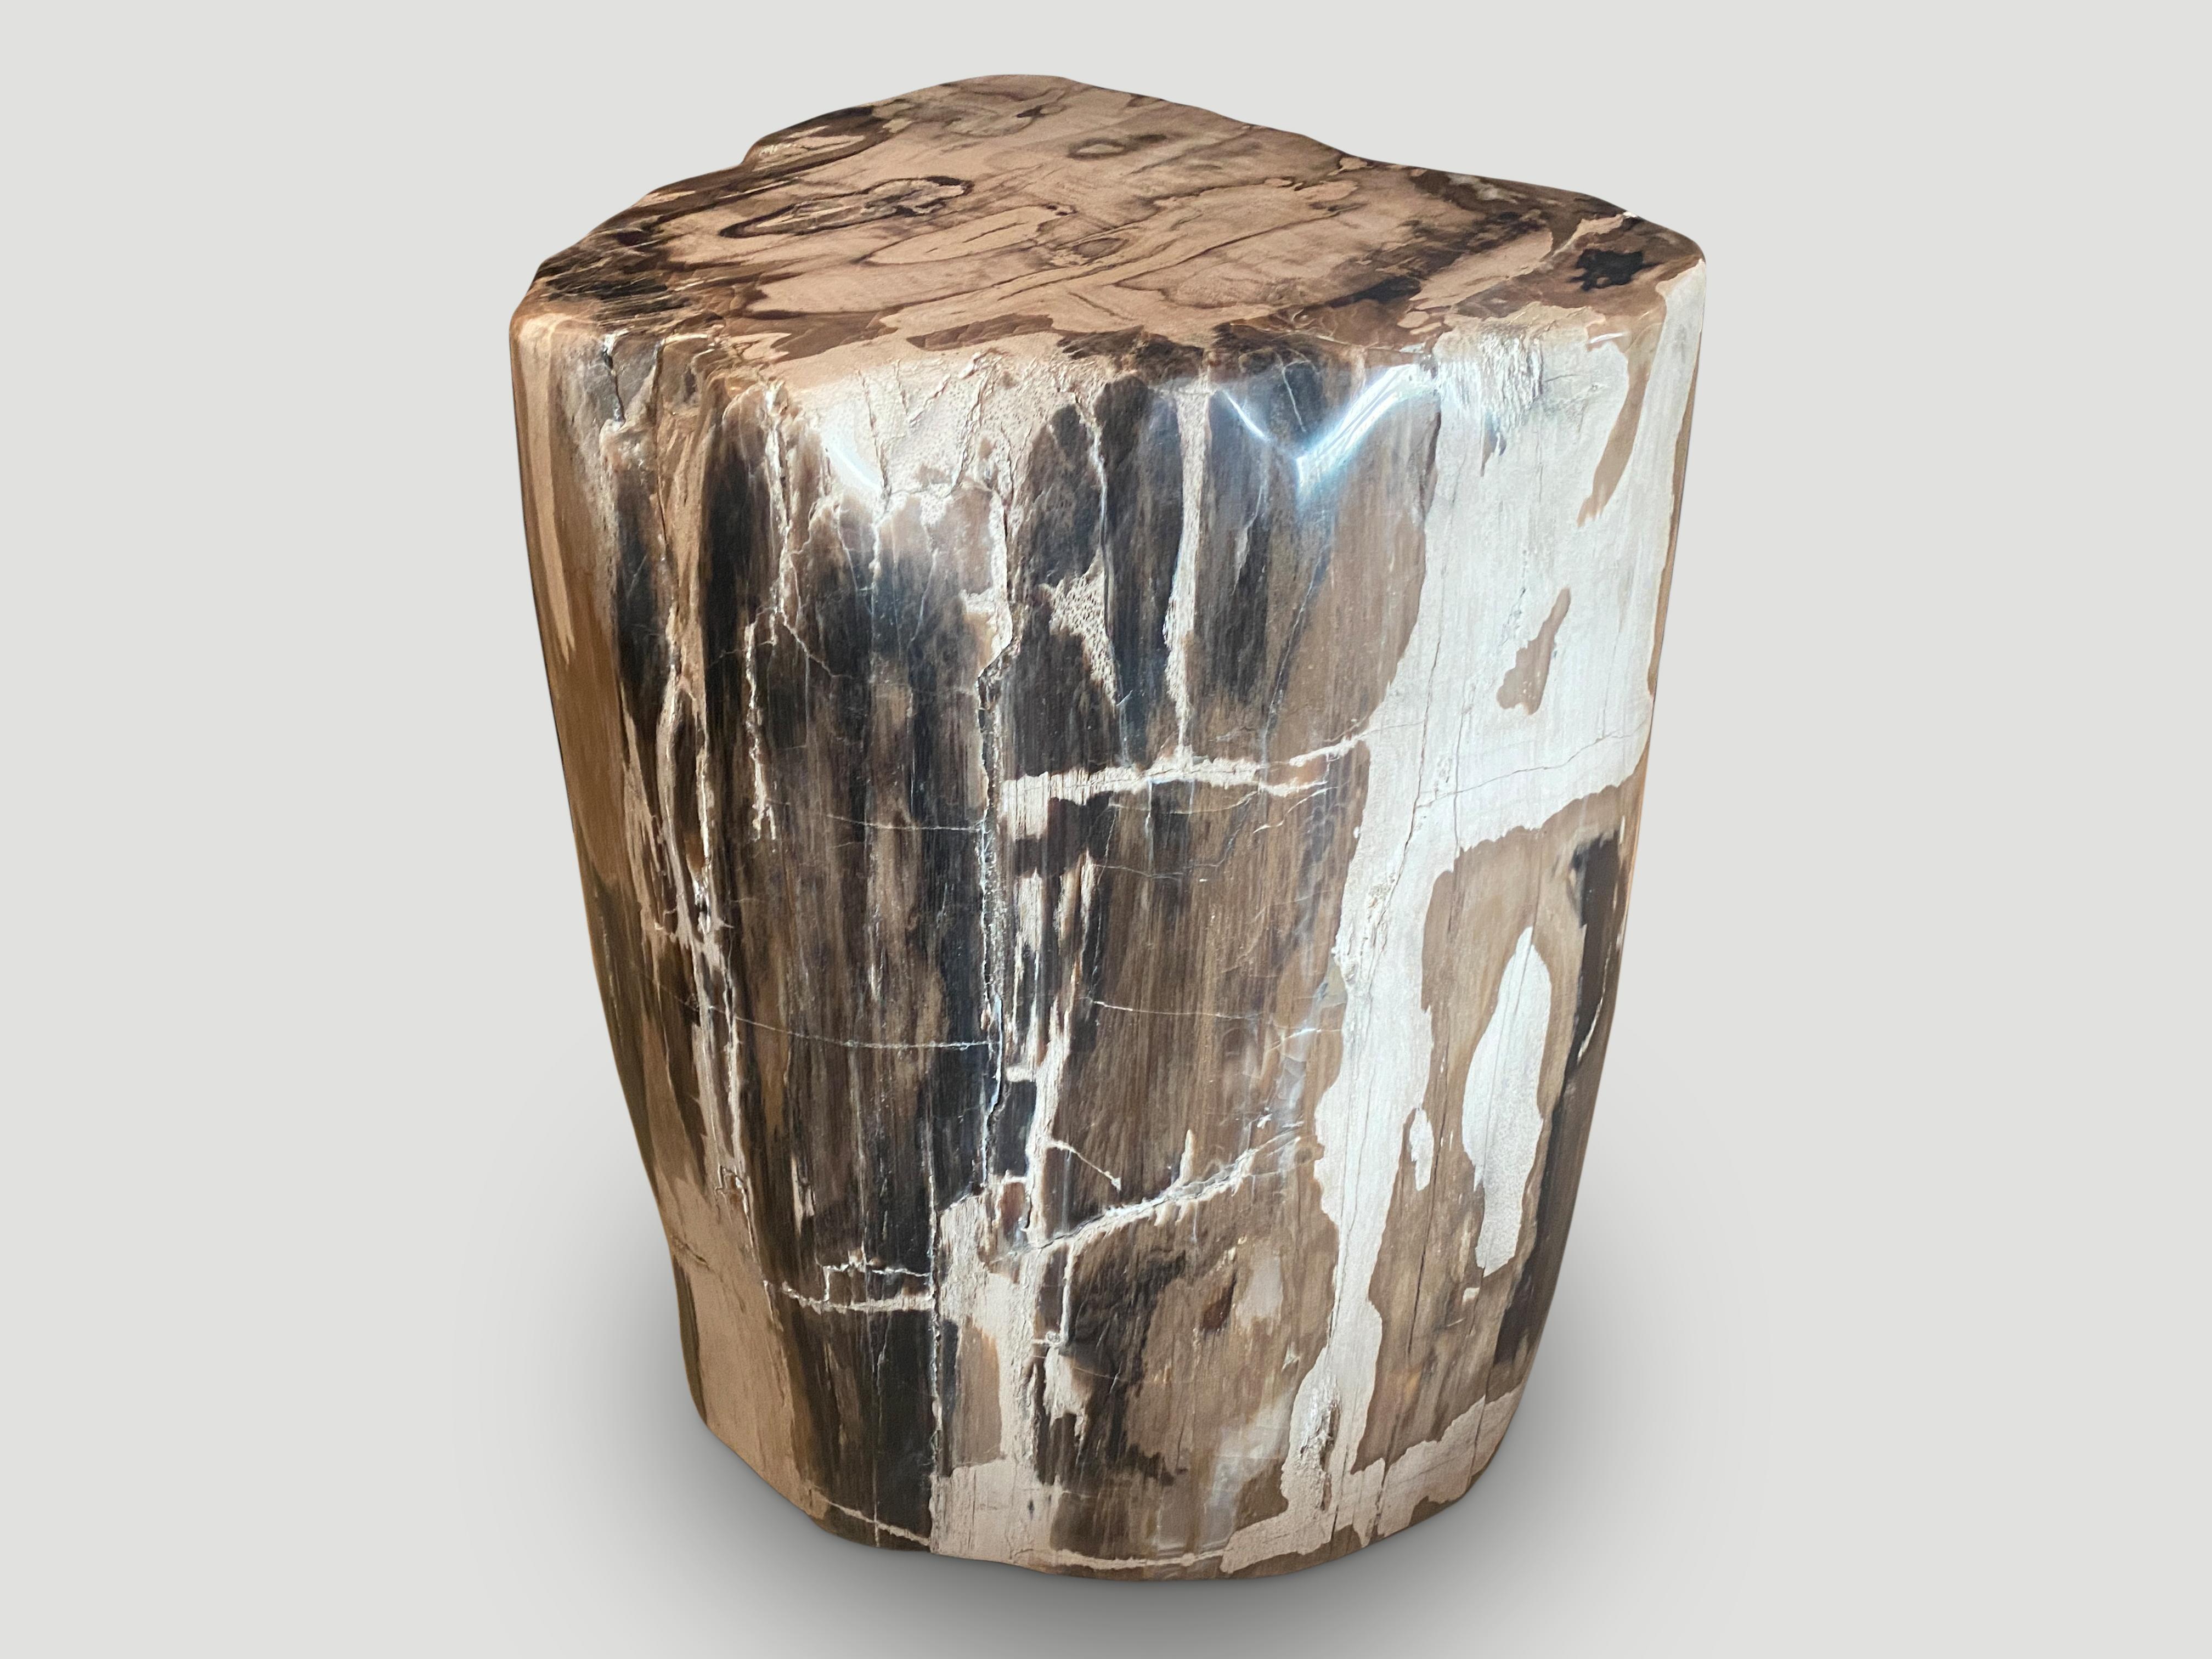 Beautiful contrasting tones and markings on this impressive high quality petrified wood side table or pedestal. It’s fascinating how Mother Nature produces these exquisite 40 million year old petrified teak logs with such contrasting colors and